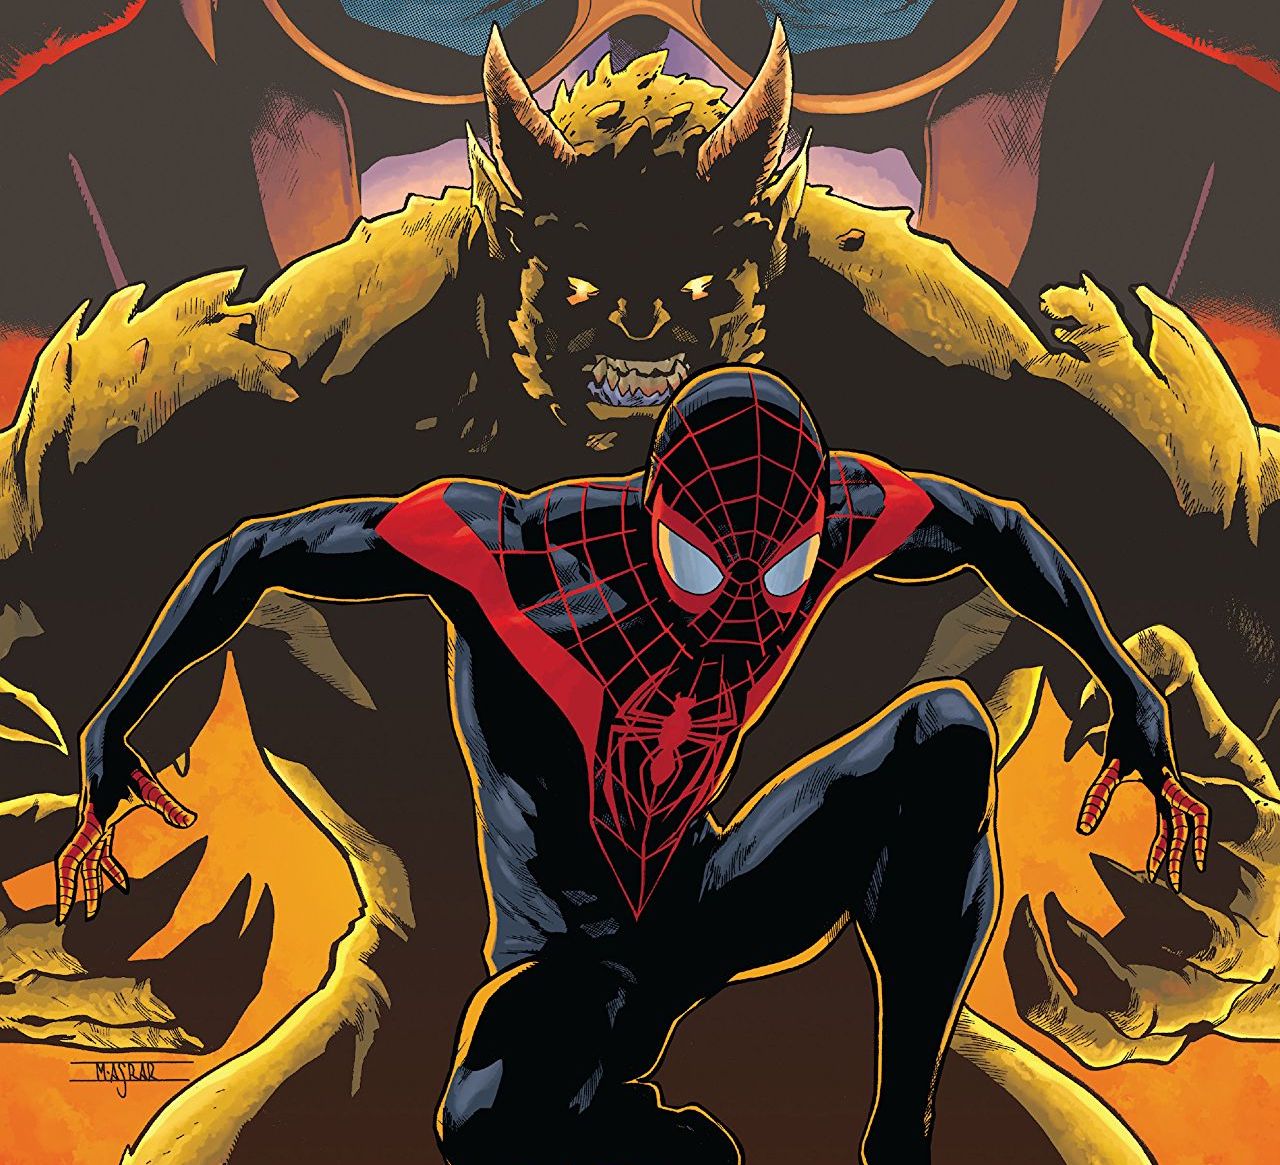 Miles Morales Vol. 2: Bring on the Bad Guys Review